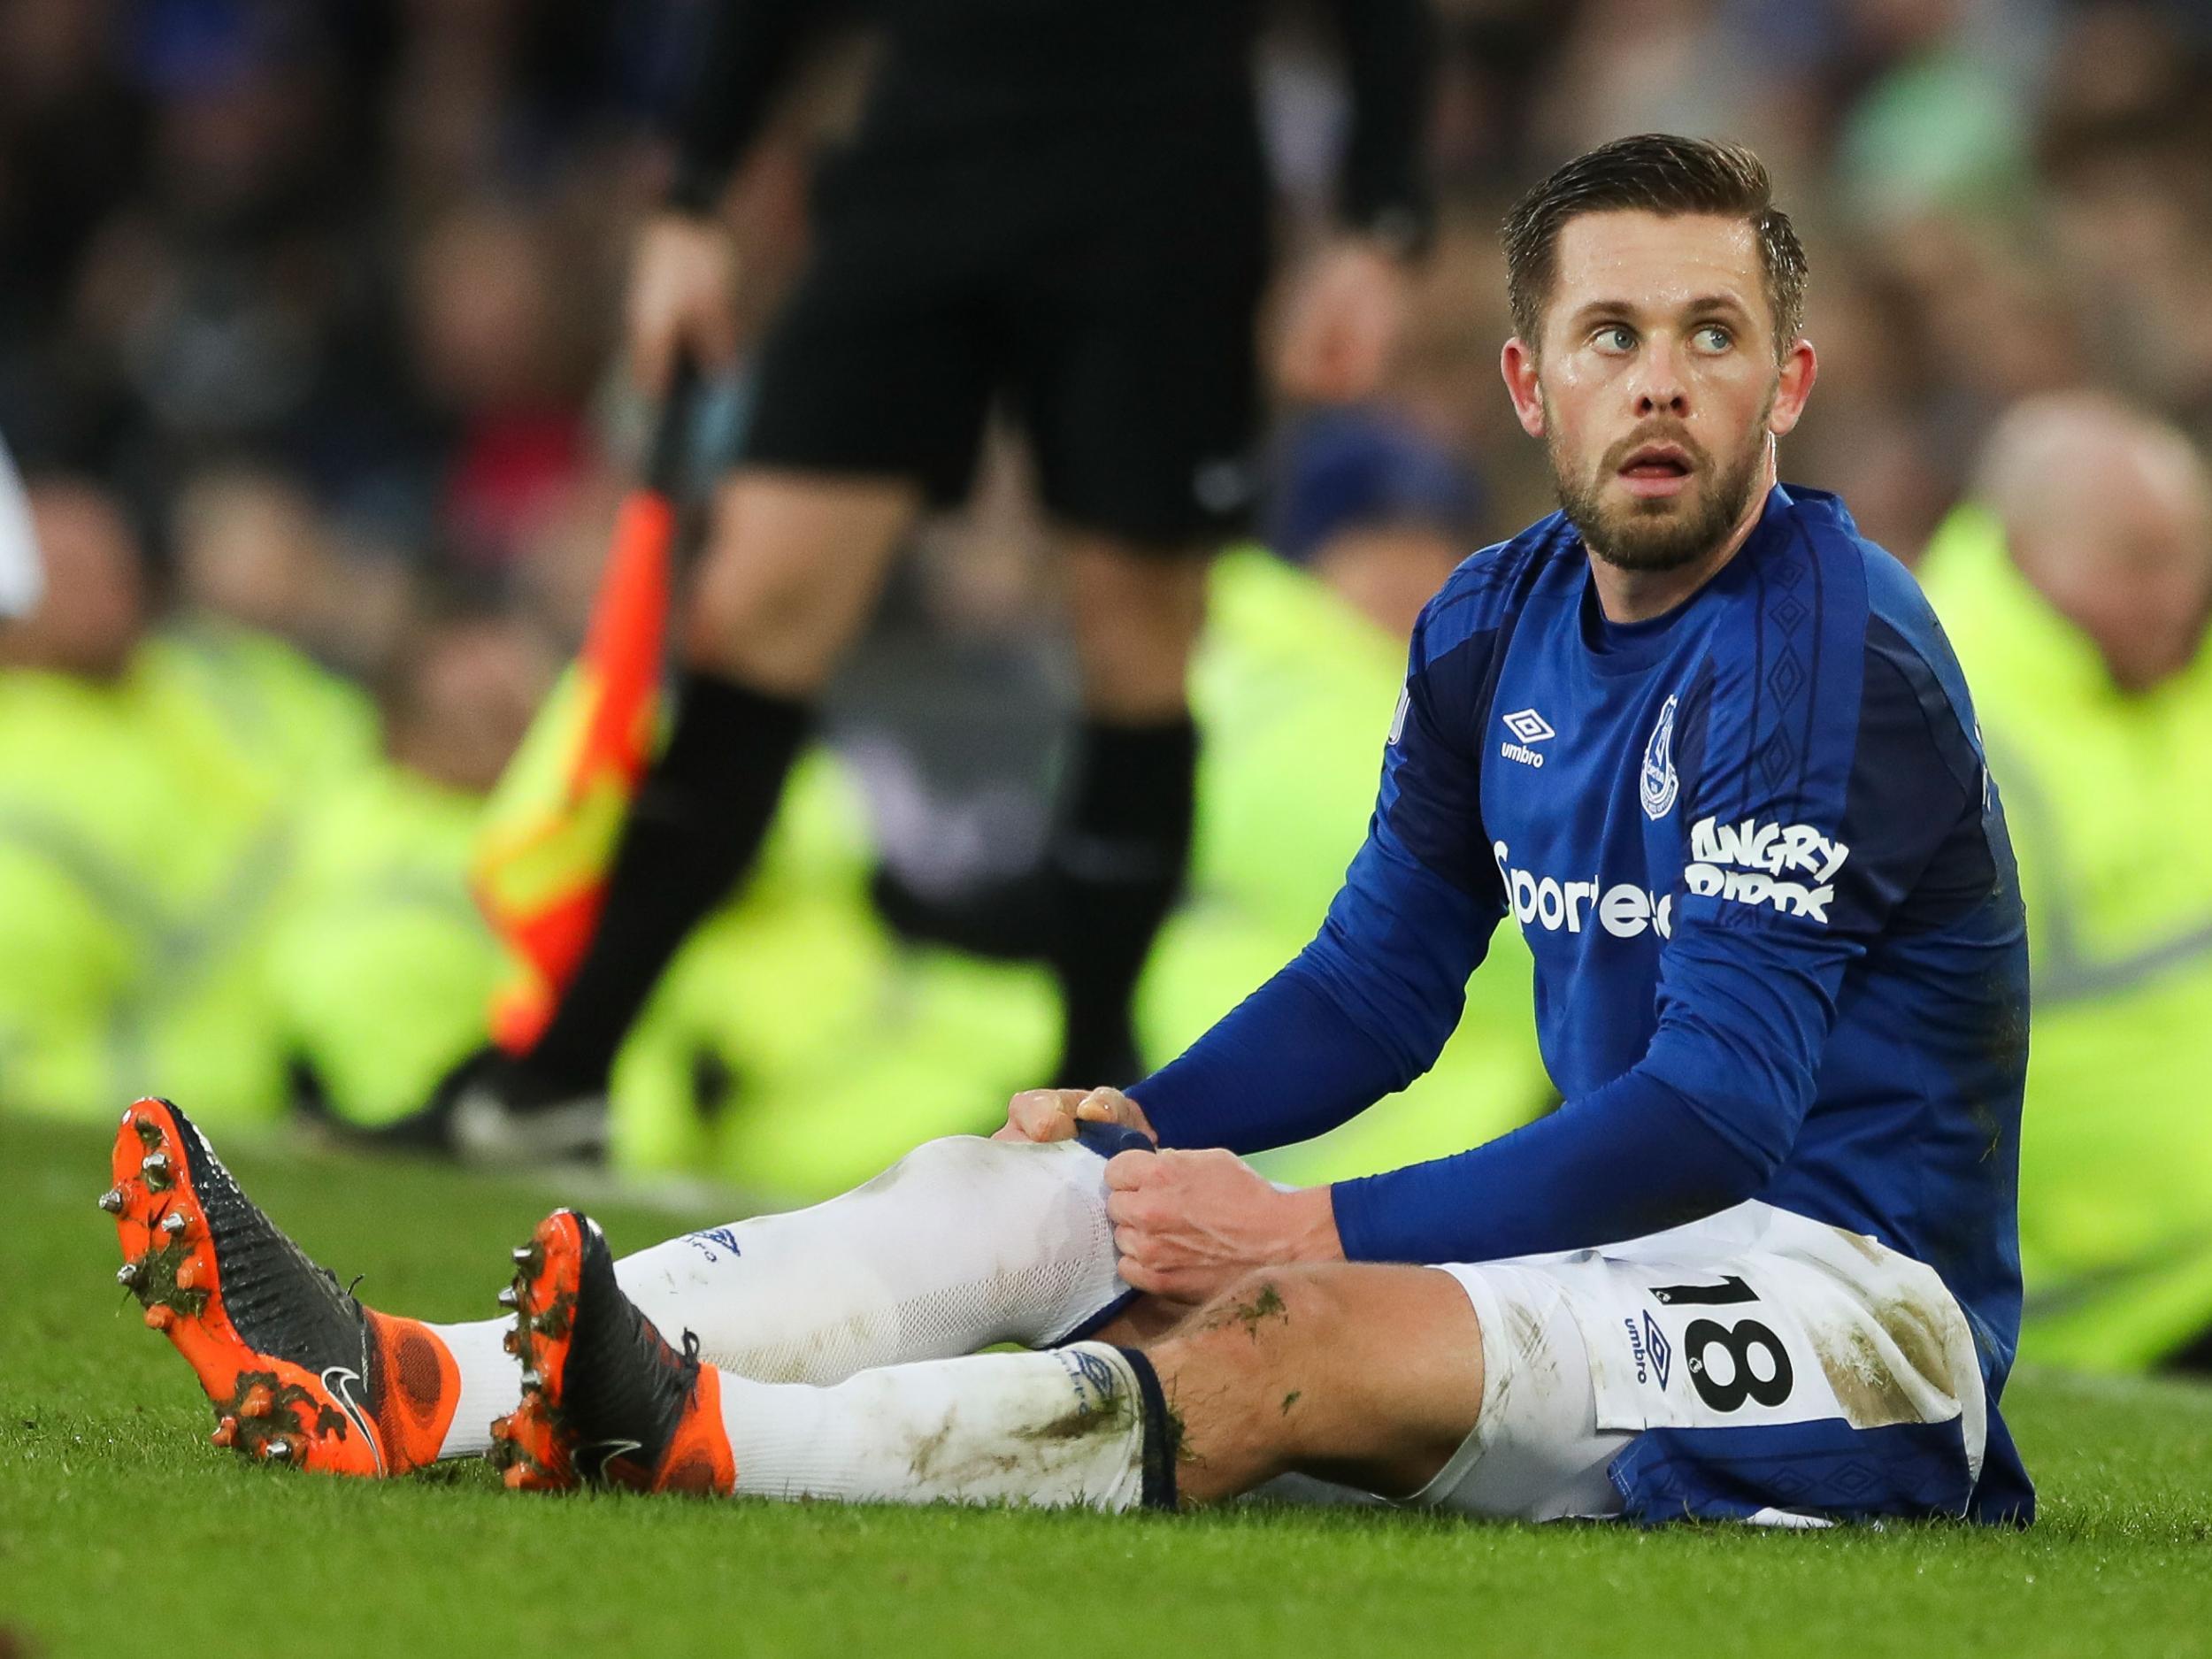 Gylfi Sigurdsson is likely to miss the remainder of Everton's season